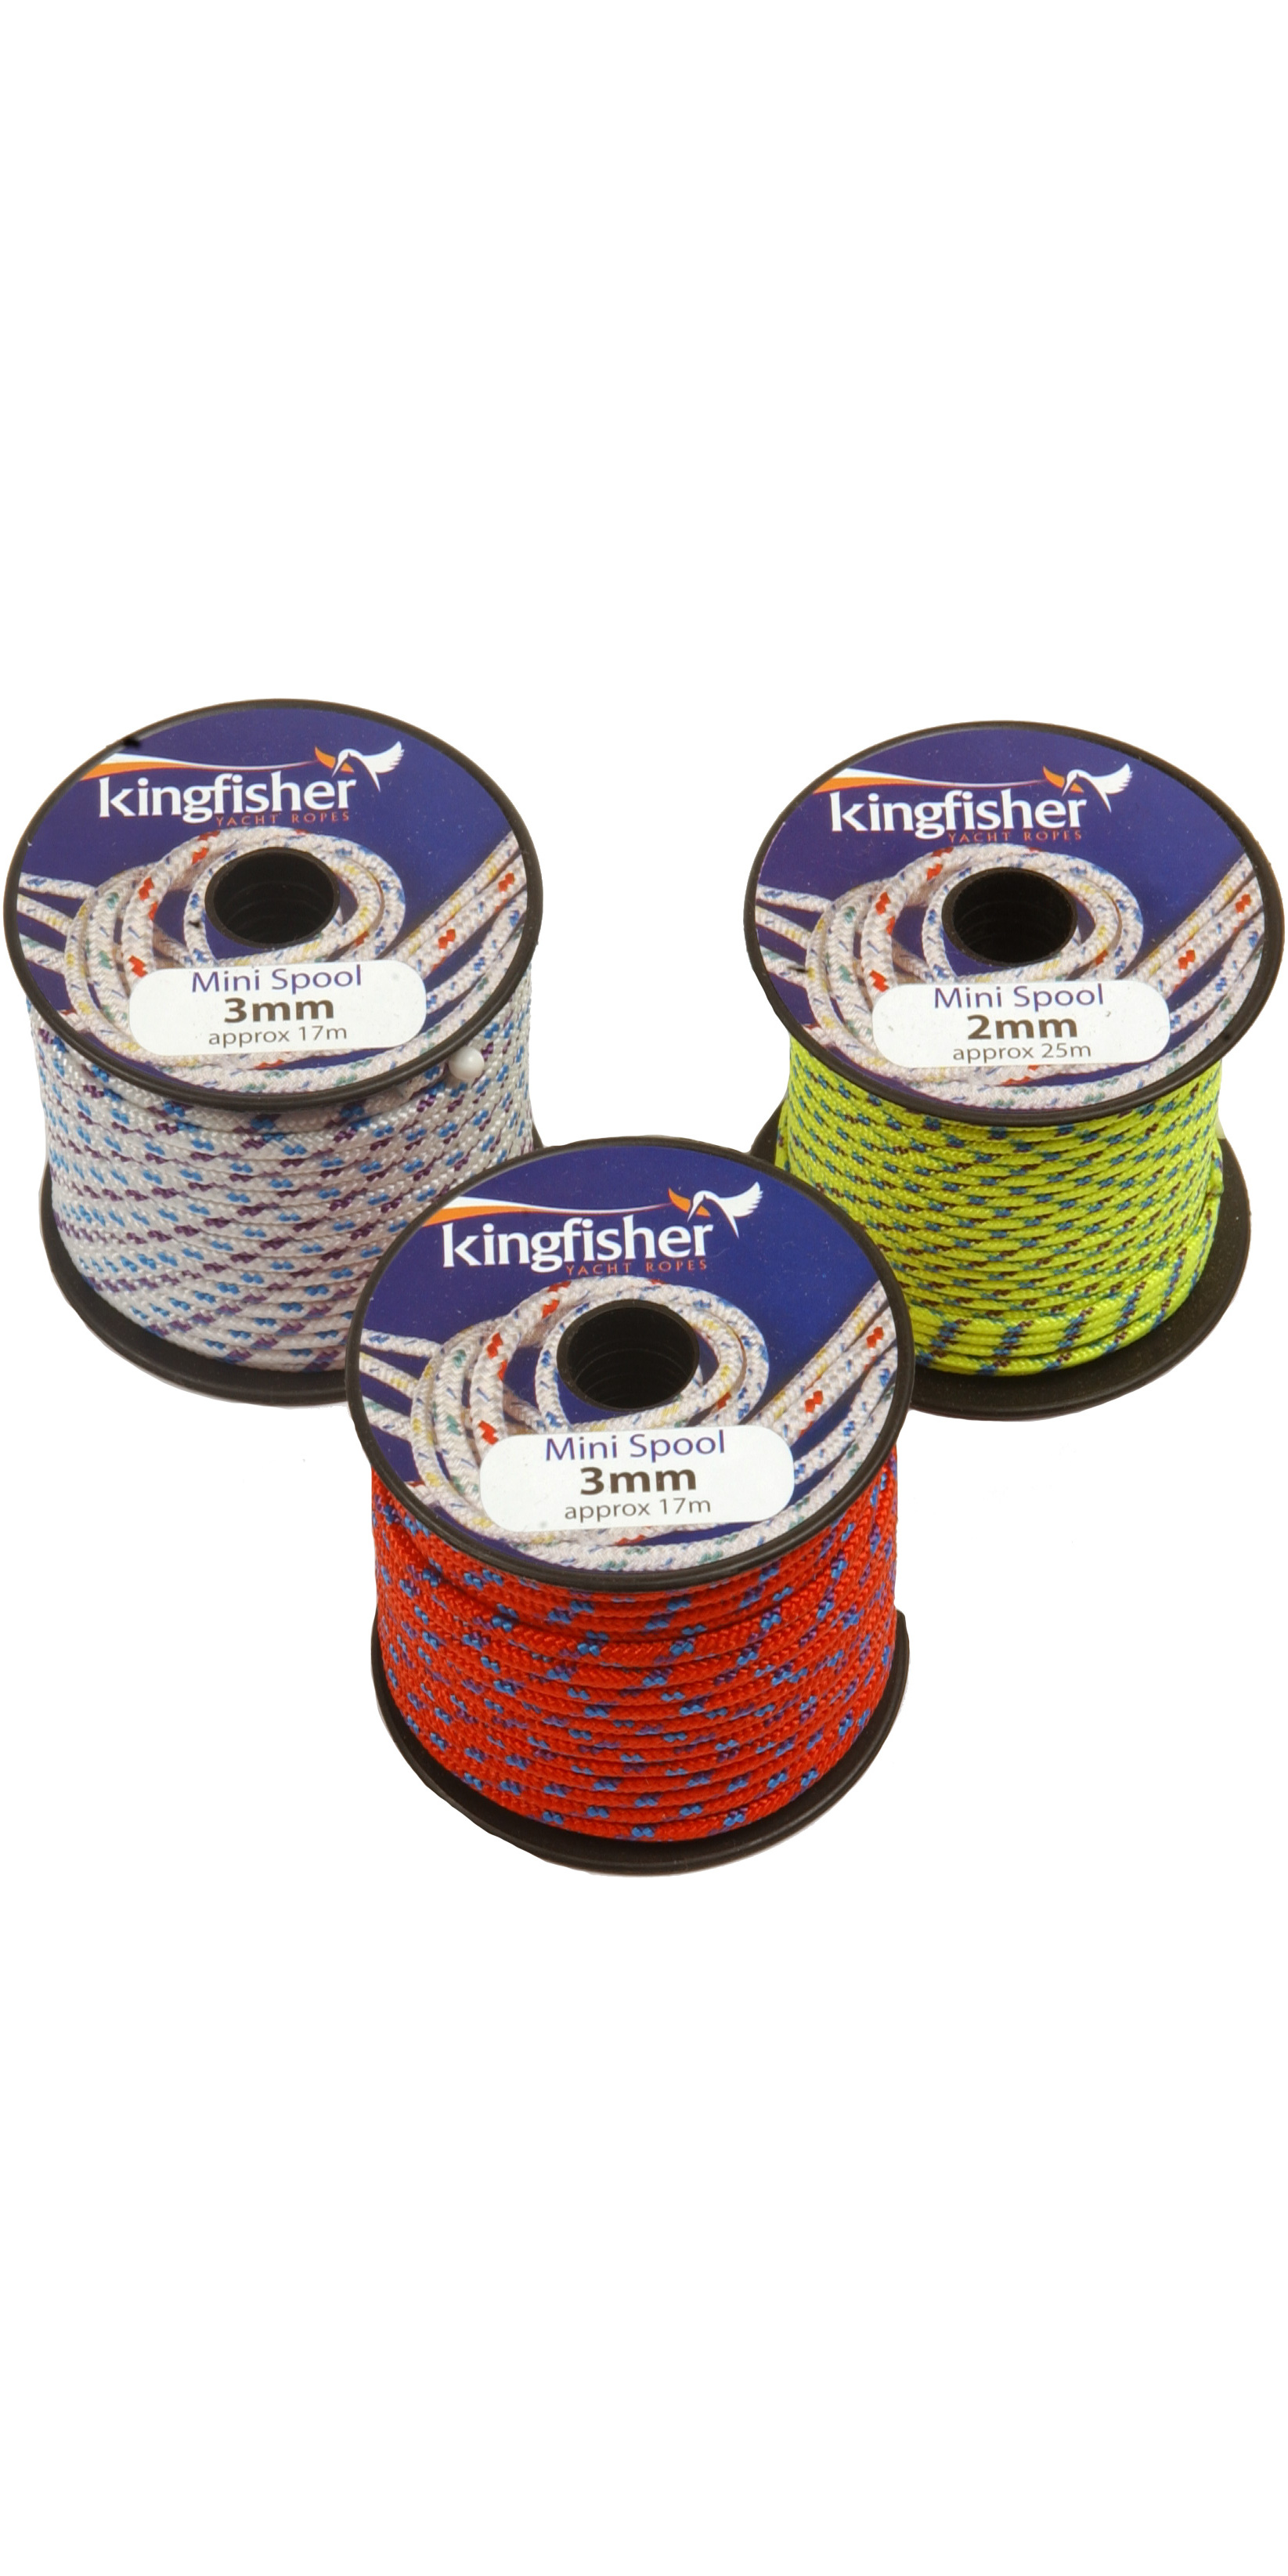 2mm Yellow Kingfisher Evo Performance Polyester Rope Mini Spool FREE Delivery